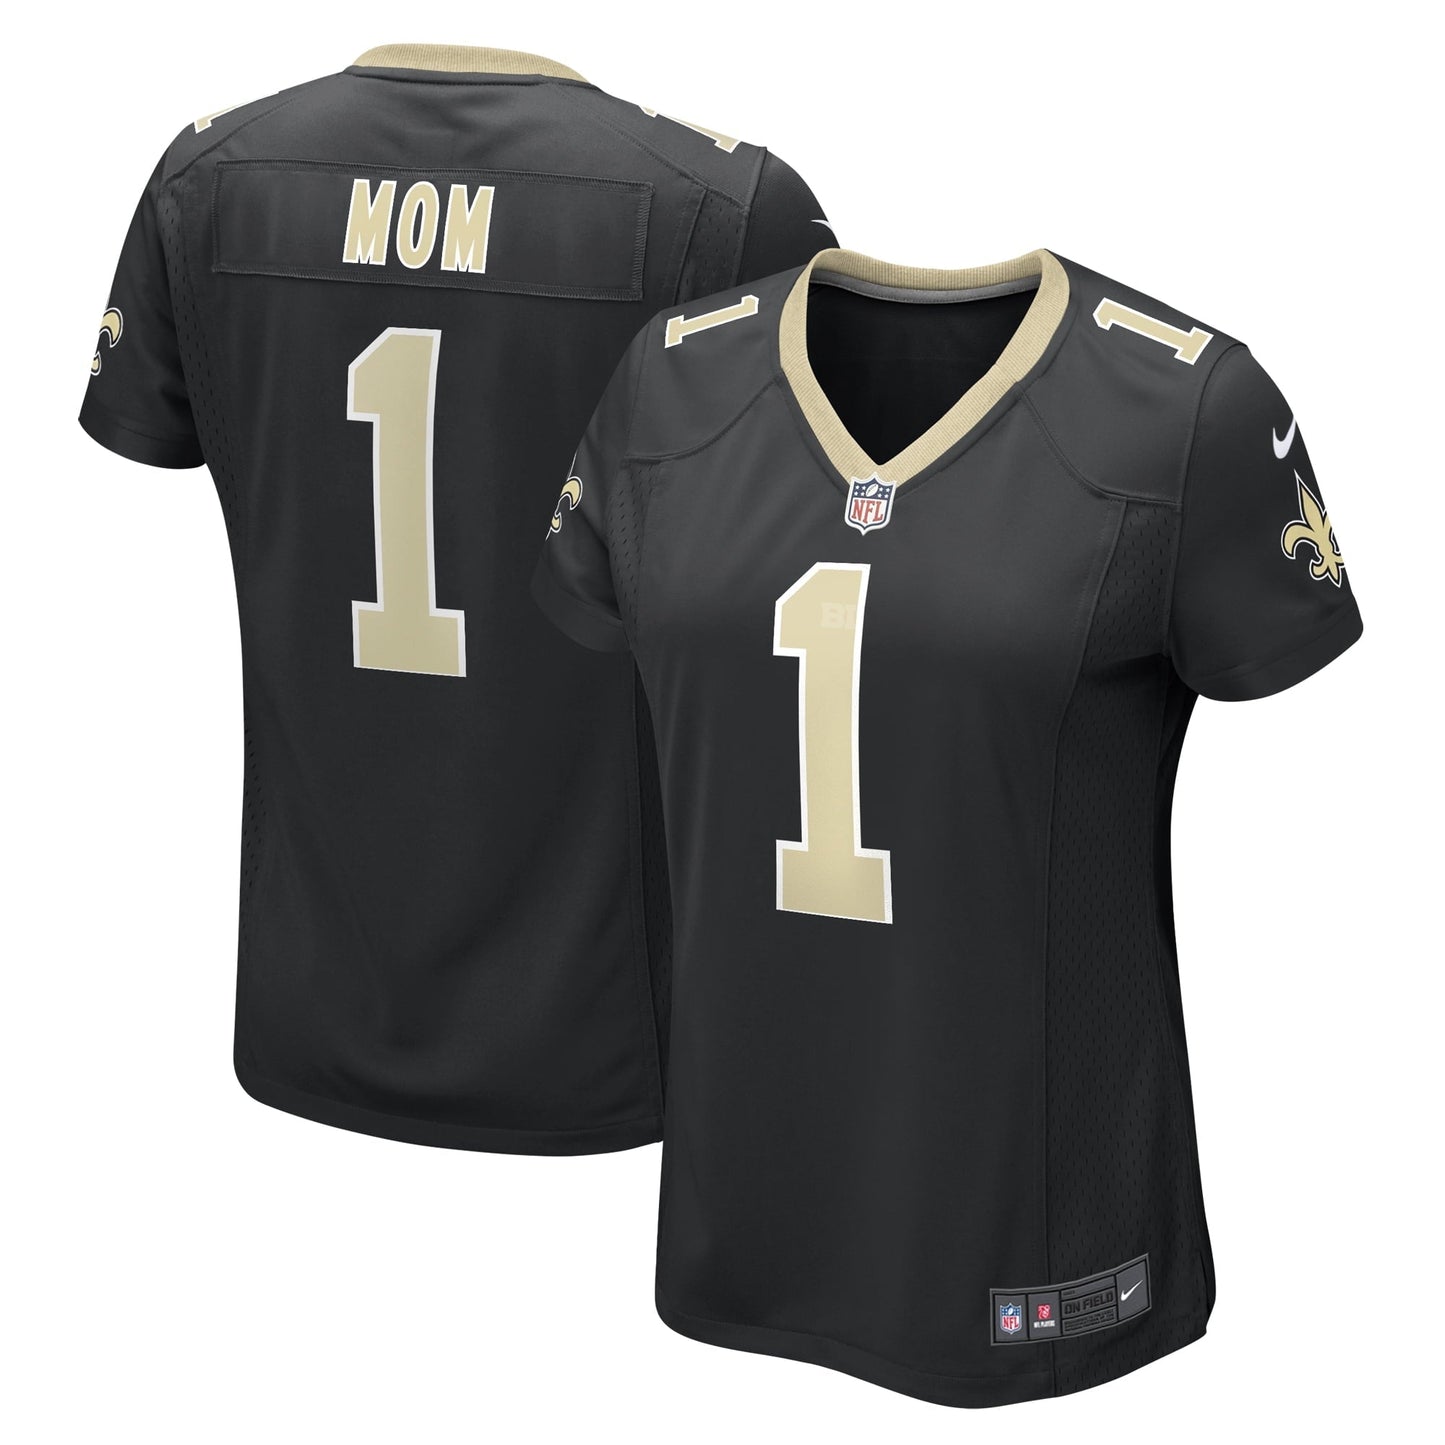 Women's Nike Number 1 Mom Black New Orleans Saints Game Jersey